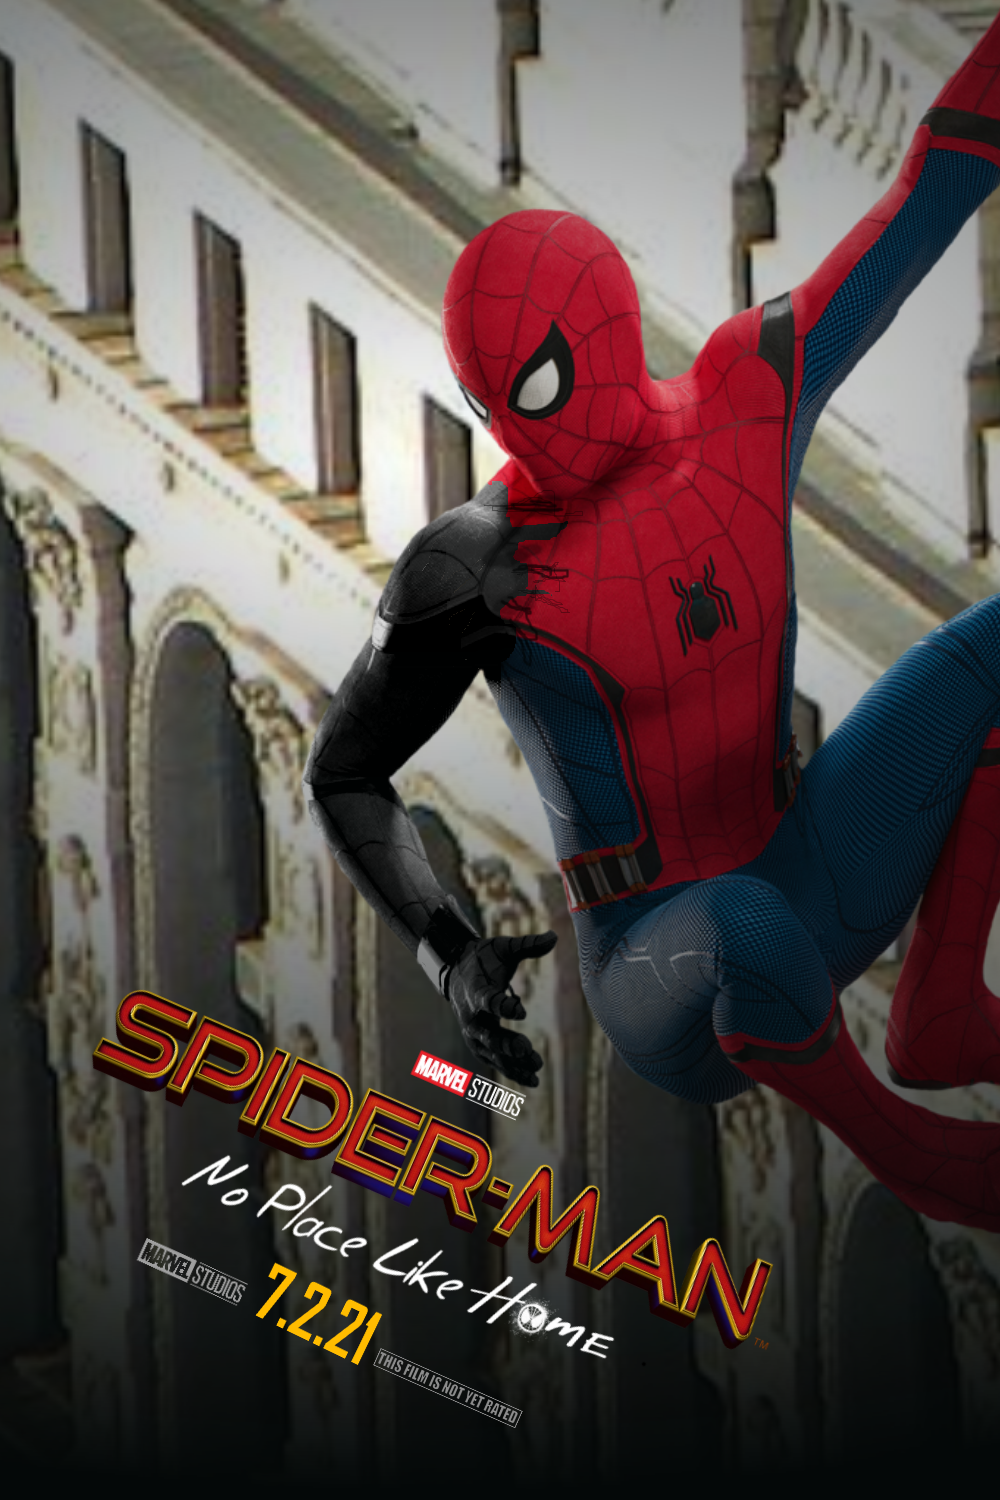 download the new Spider-Man: No Way Home